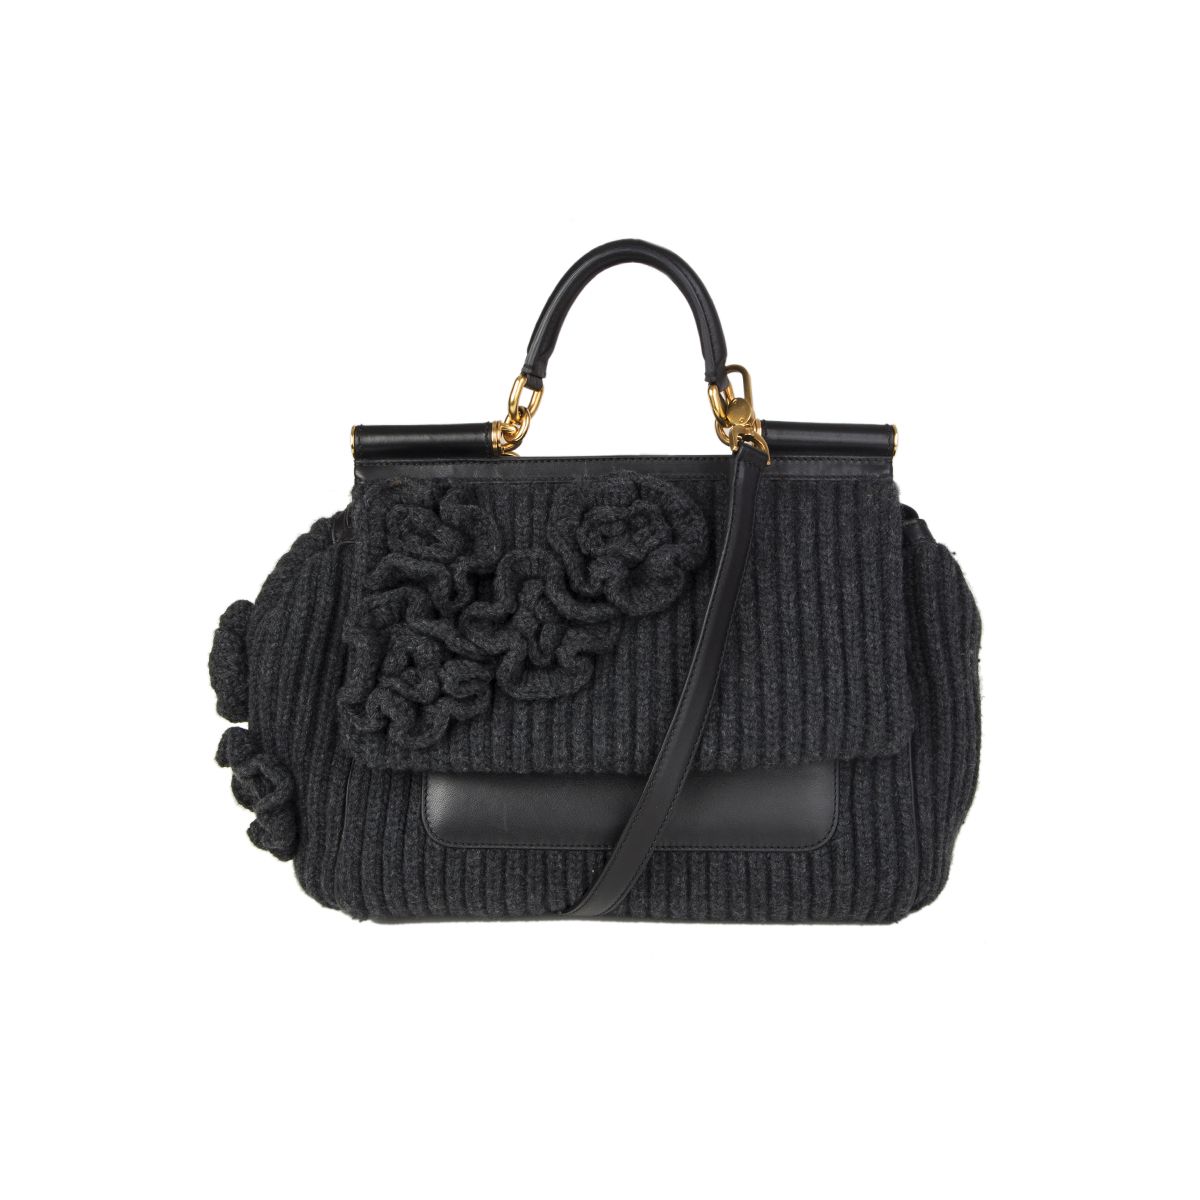 Dolce and Gabbana Beige Raffia and Python Small Miss Sicily Top Handle Bag  Dolce & Gabbana